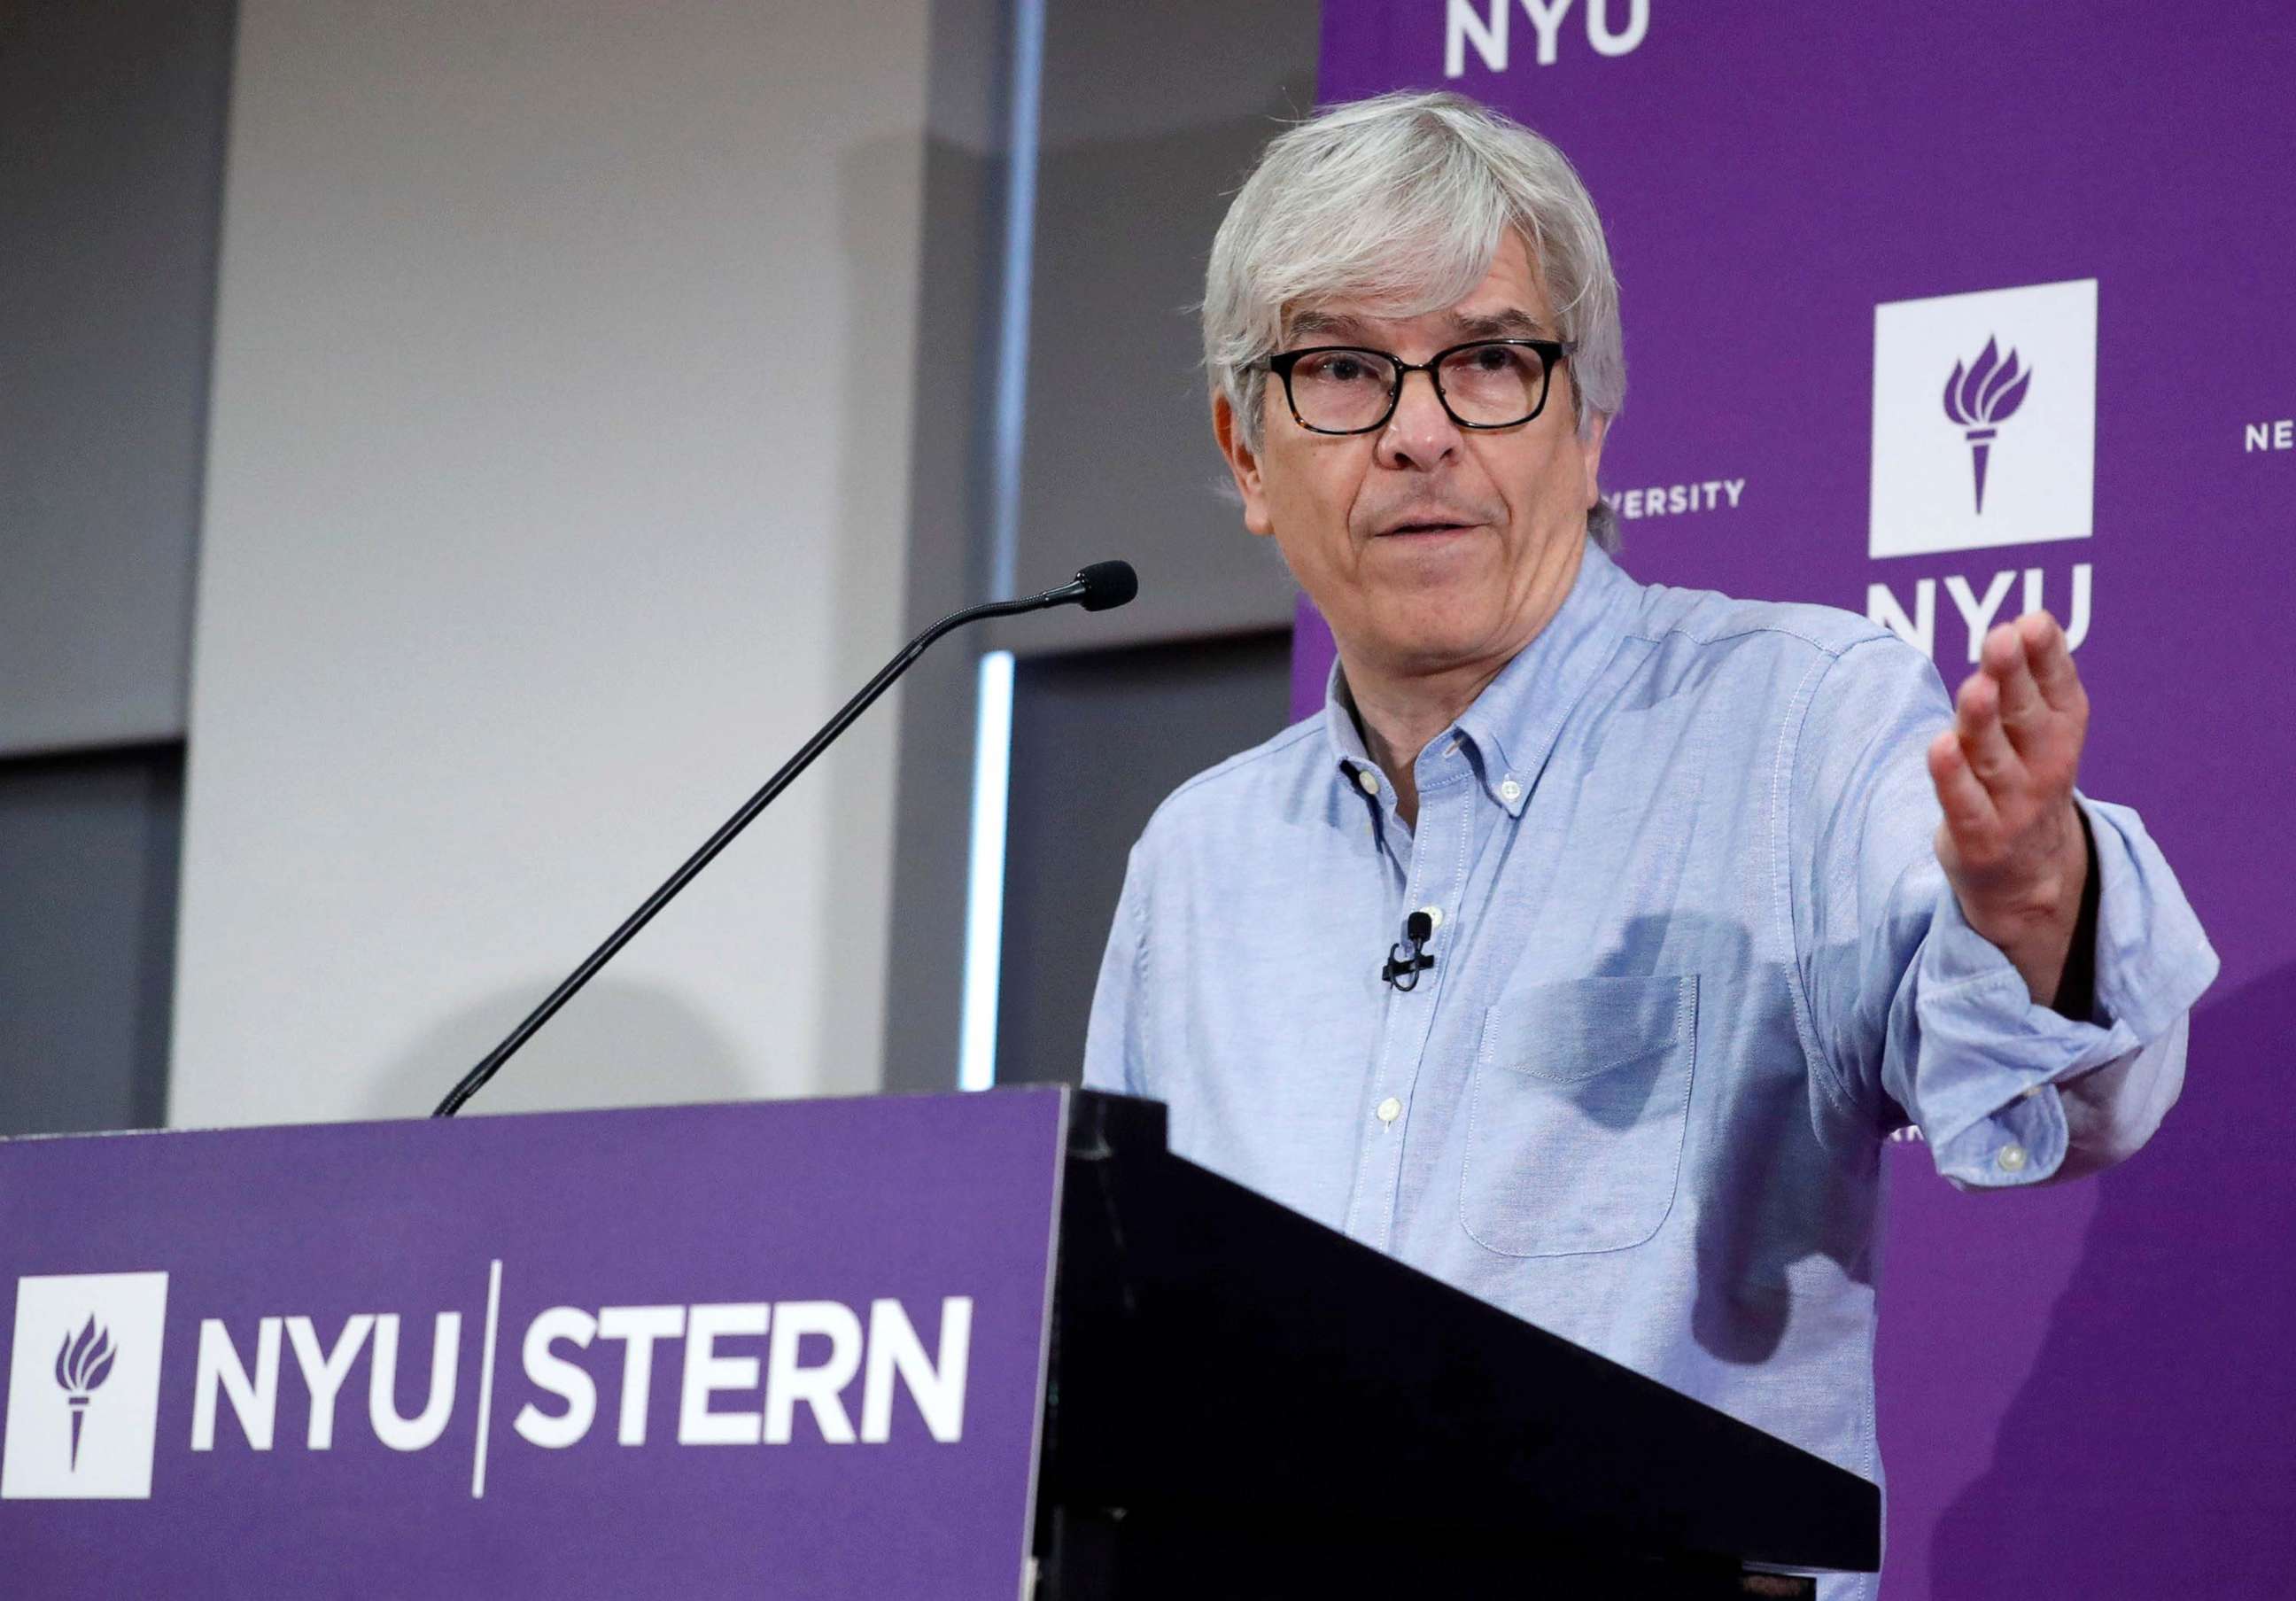 PHOTO: Paul M. Romer of the NYU Stern School of Business who has been awarded the 2018 Nobel Prize in Economic Sciences 'for integrating technological innovations into long-run macroeconomic analysis' addresses the media in New York City, Oct. 8, 2018.